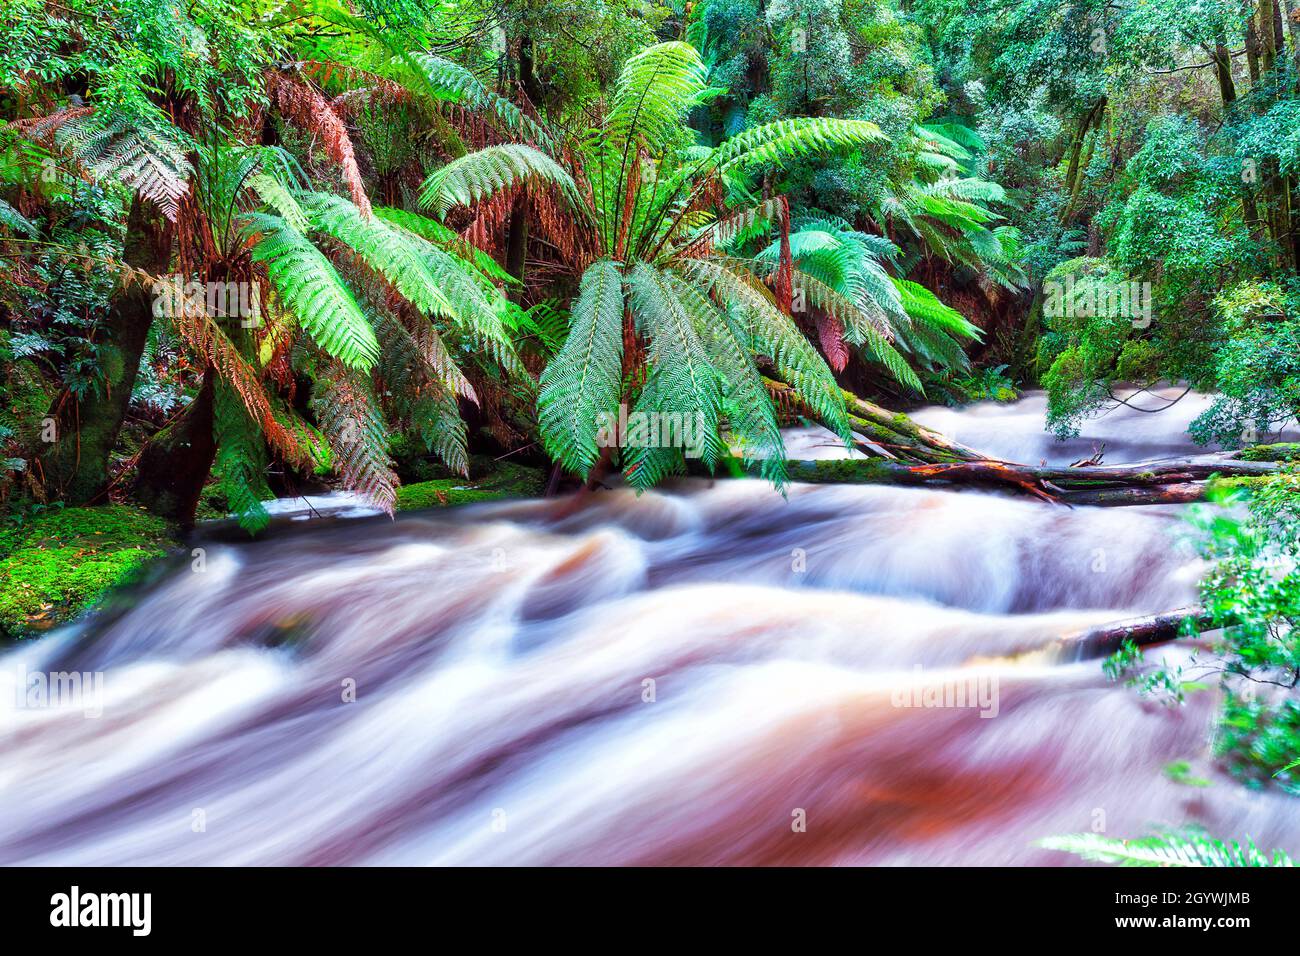 Fern and palm trees handing over wild stream of Nelson river after heavy rains in Tasmanian rainforest. Stock Photo